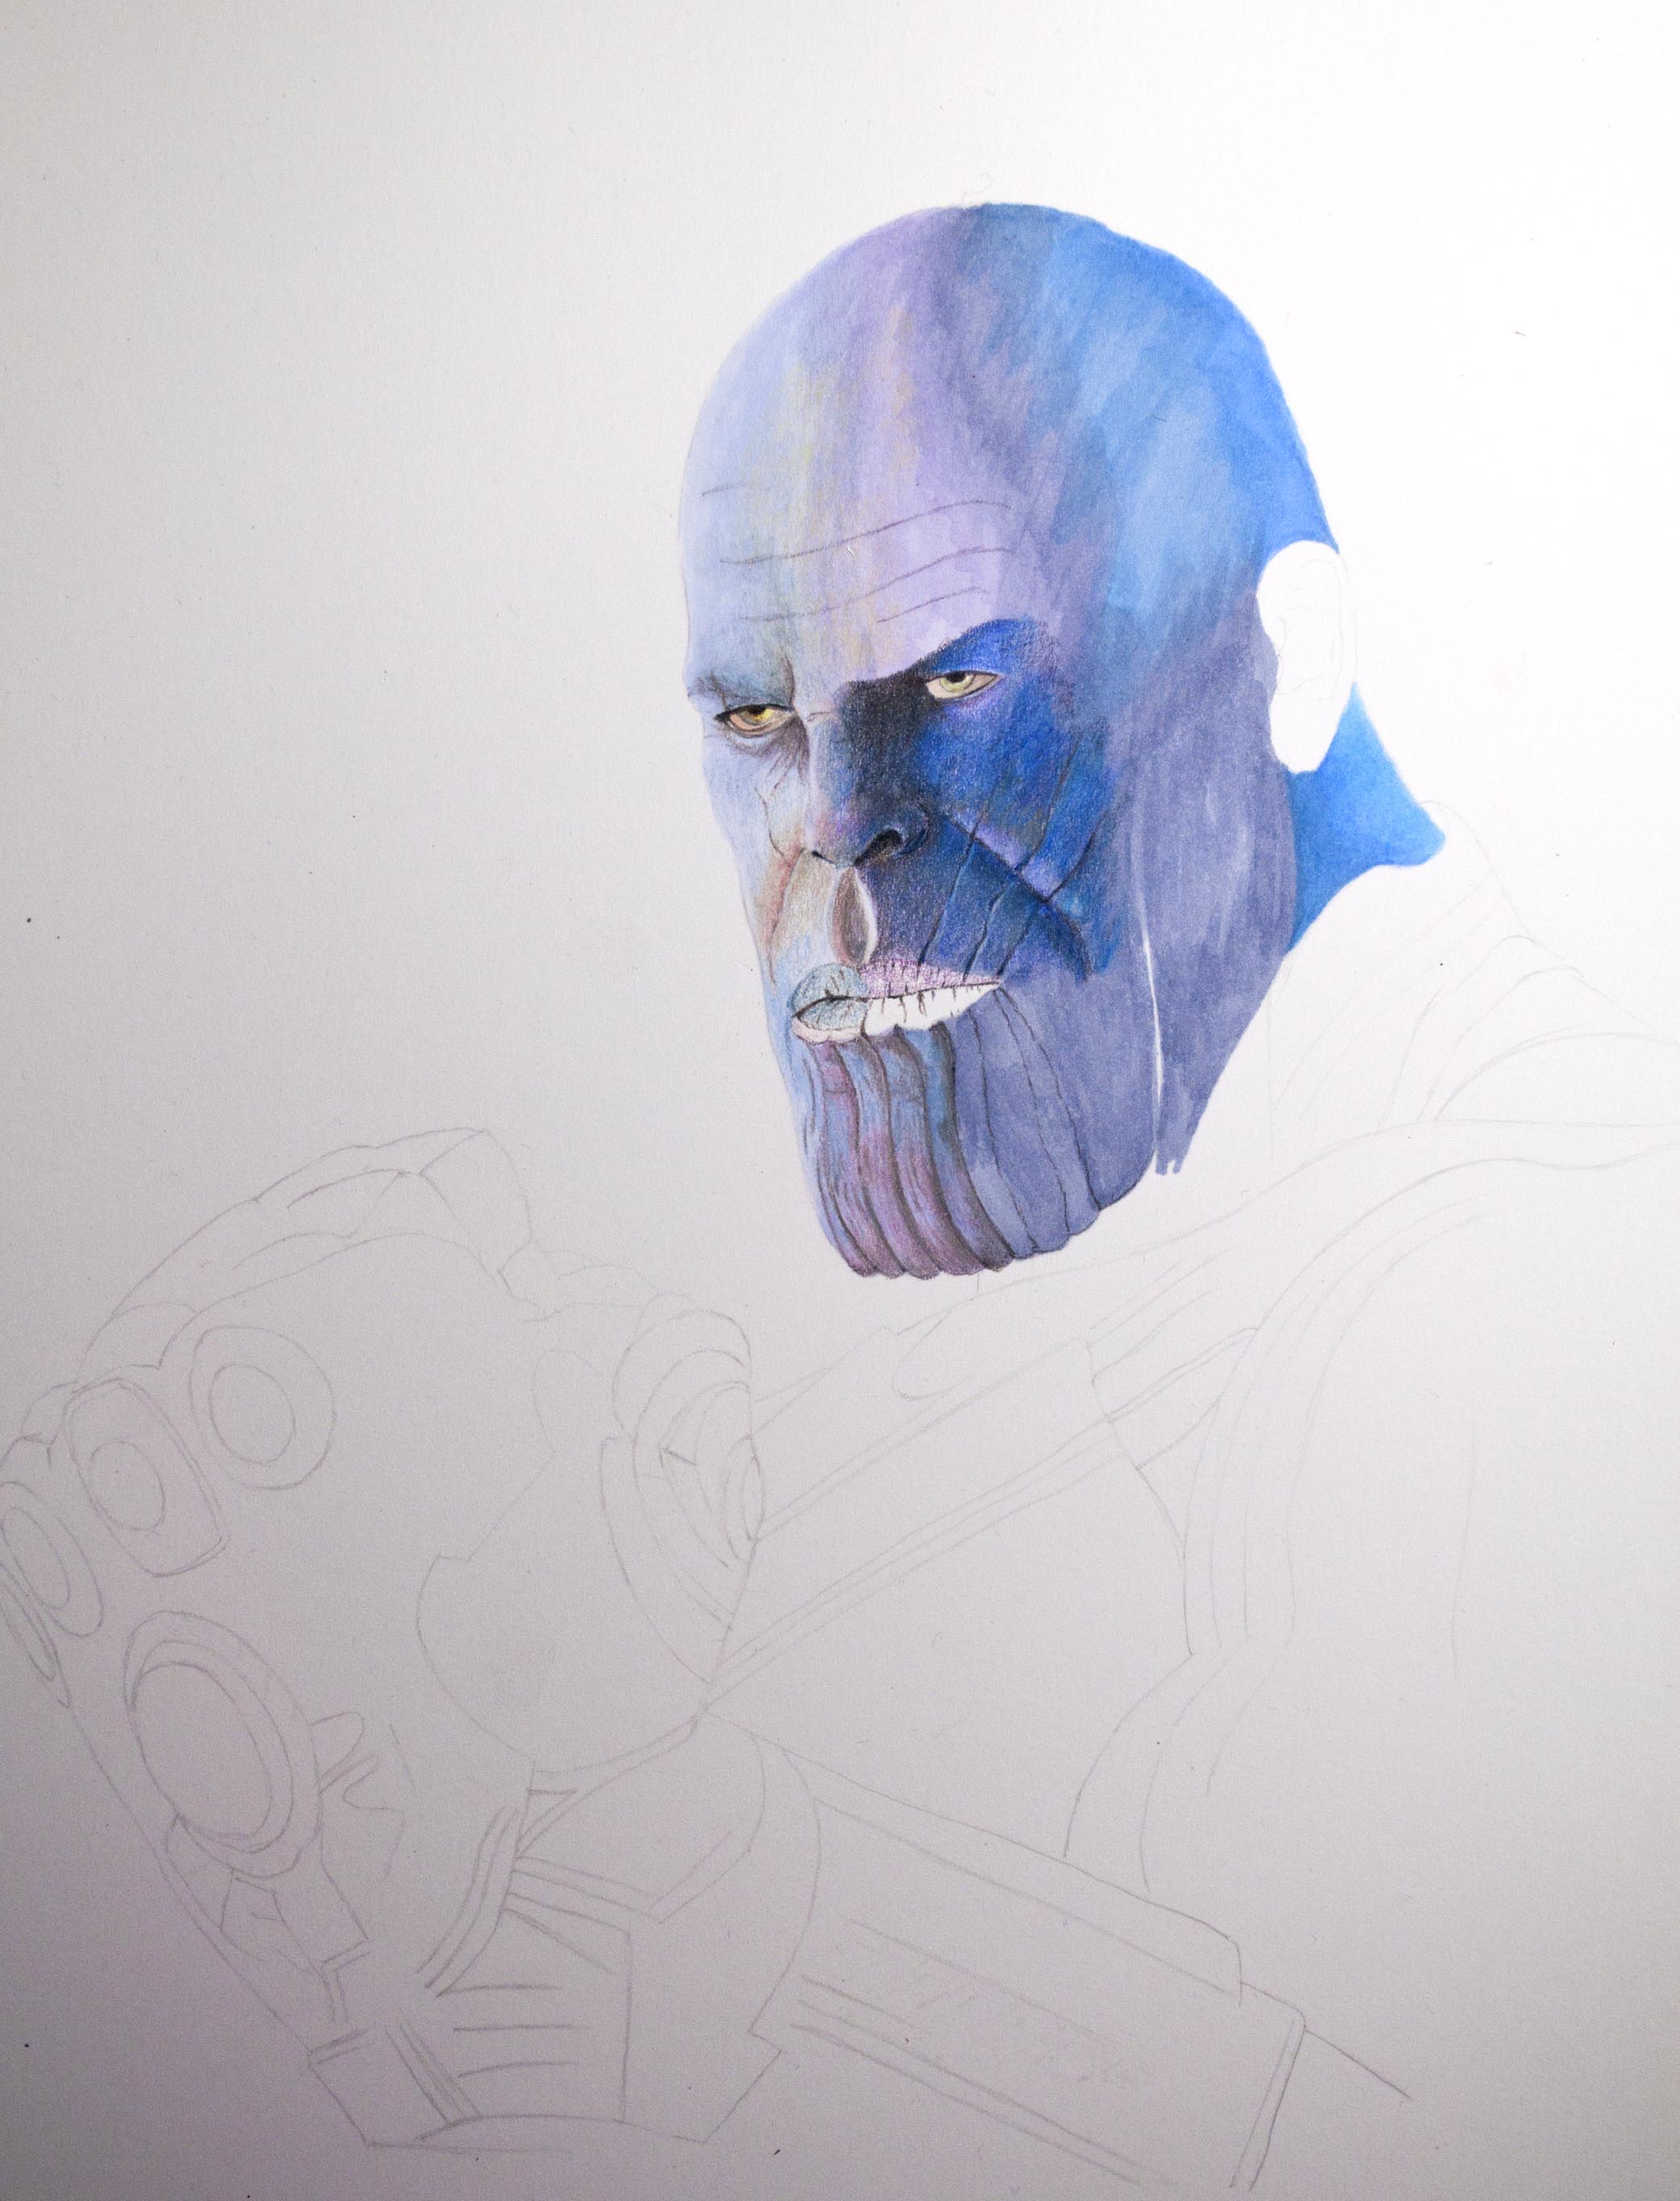 Drawings  Paintings on Twitter Pencil Drawing of Thanos  Avengers  AvengersEndgame Avengers Artist  Joao Marcos  httpstcoFmFffwAcN6   X